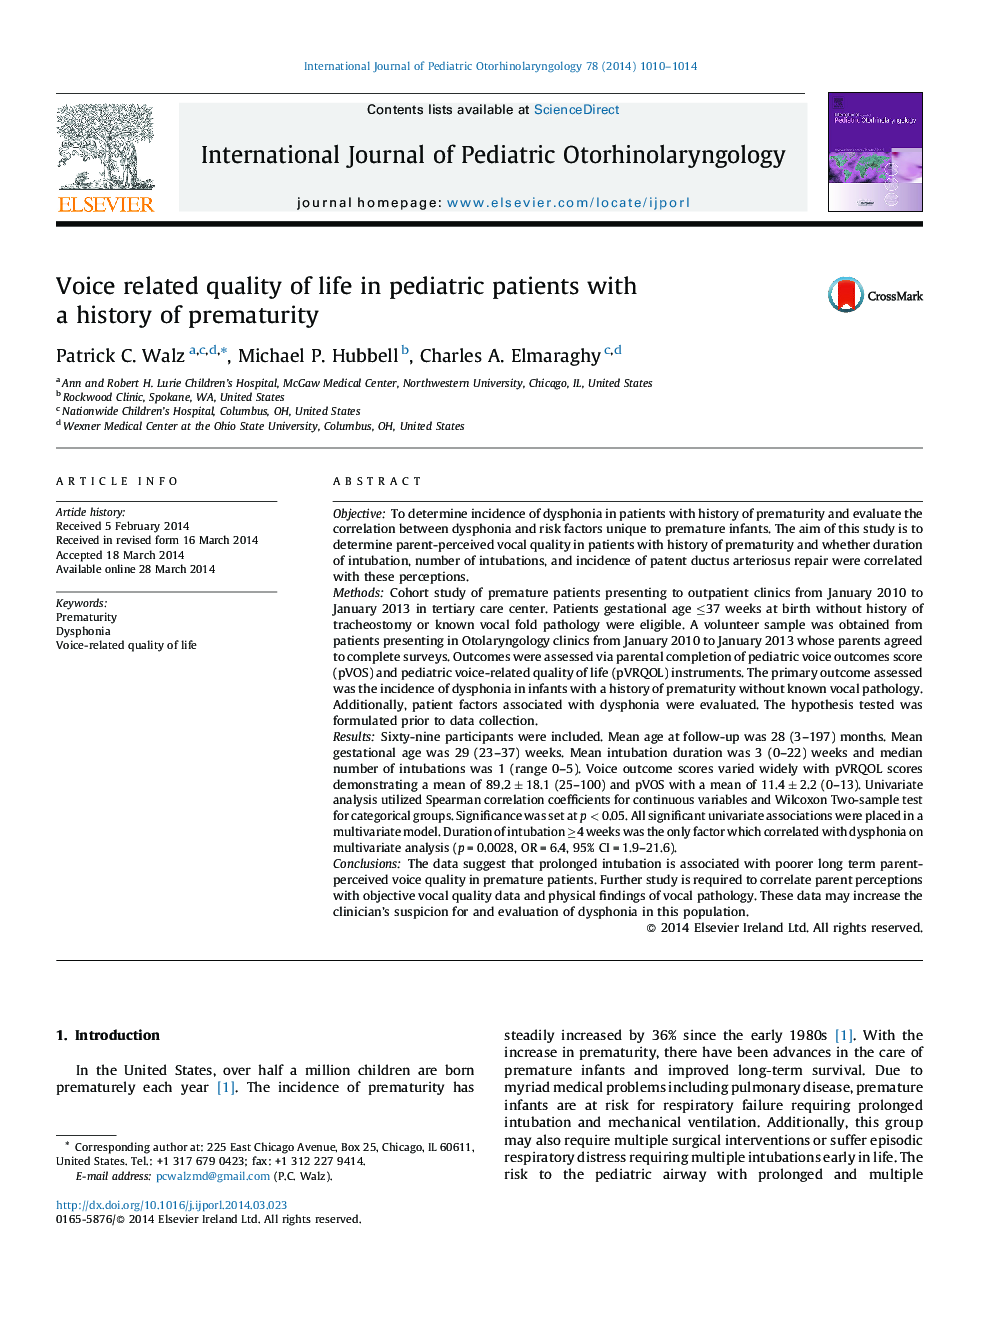 Voice related quality of life in pediatric patients with a history of prematurity